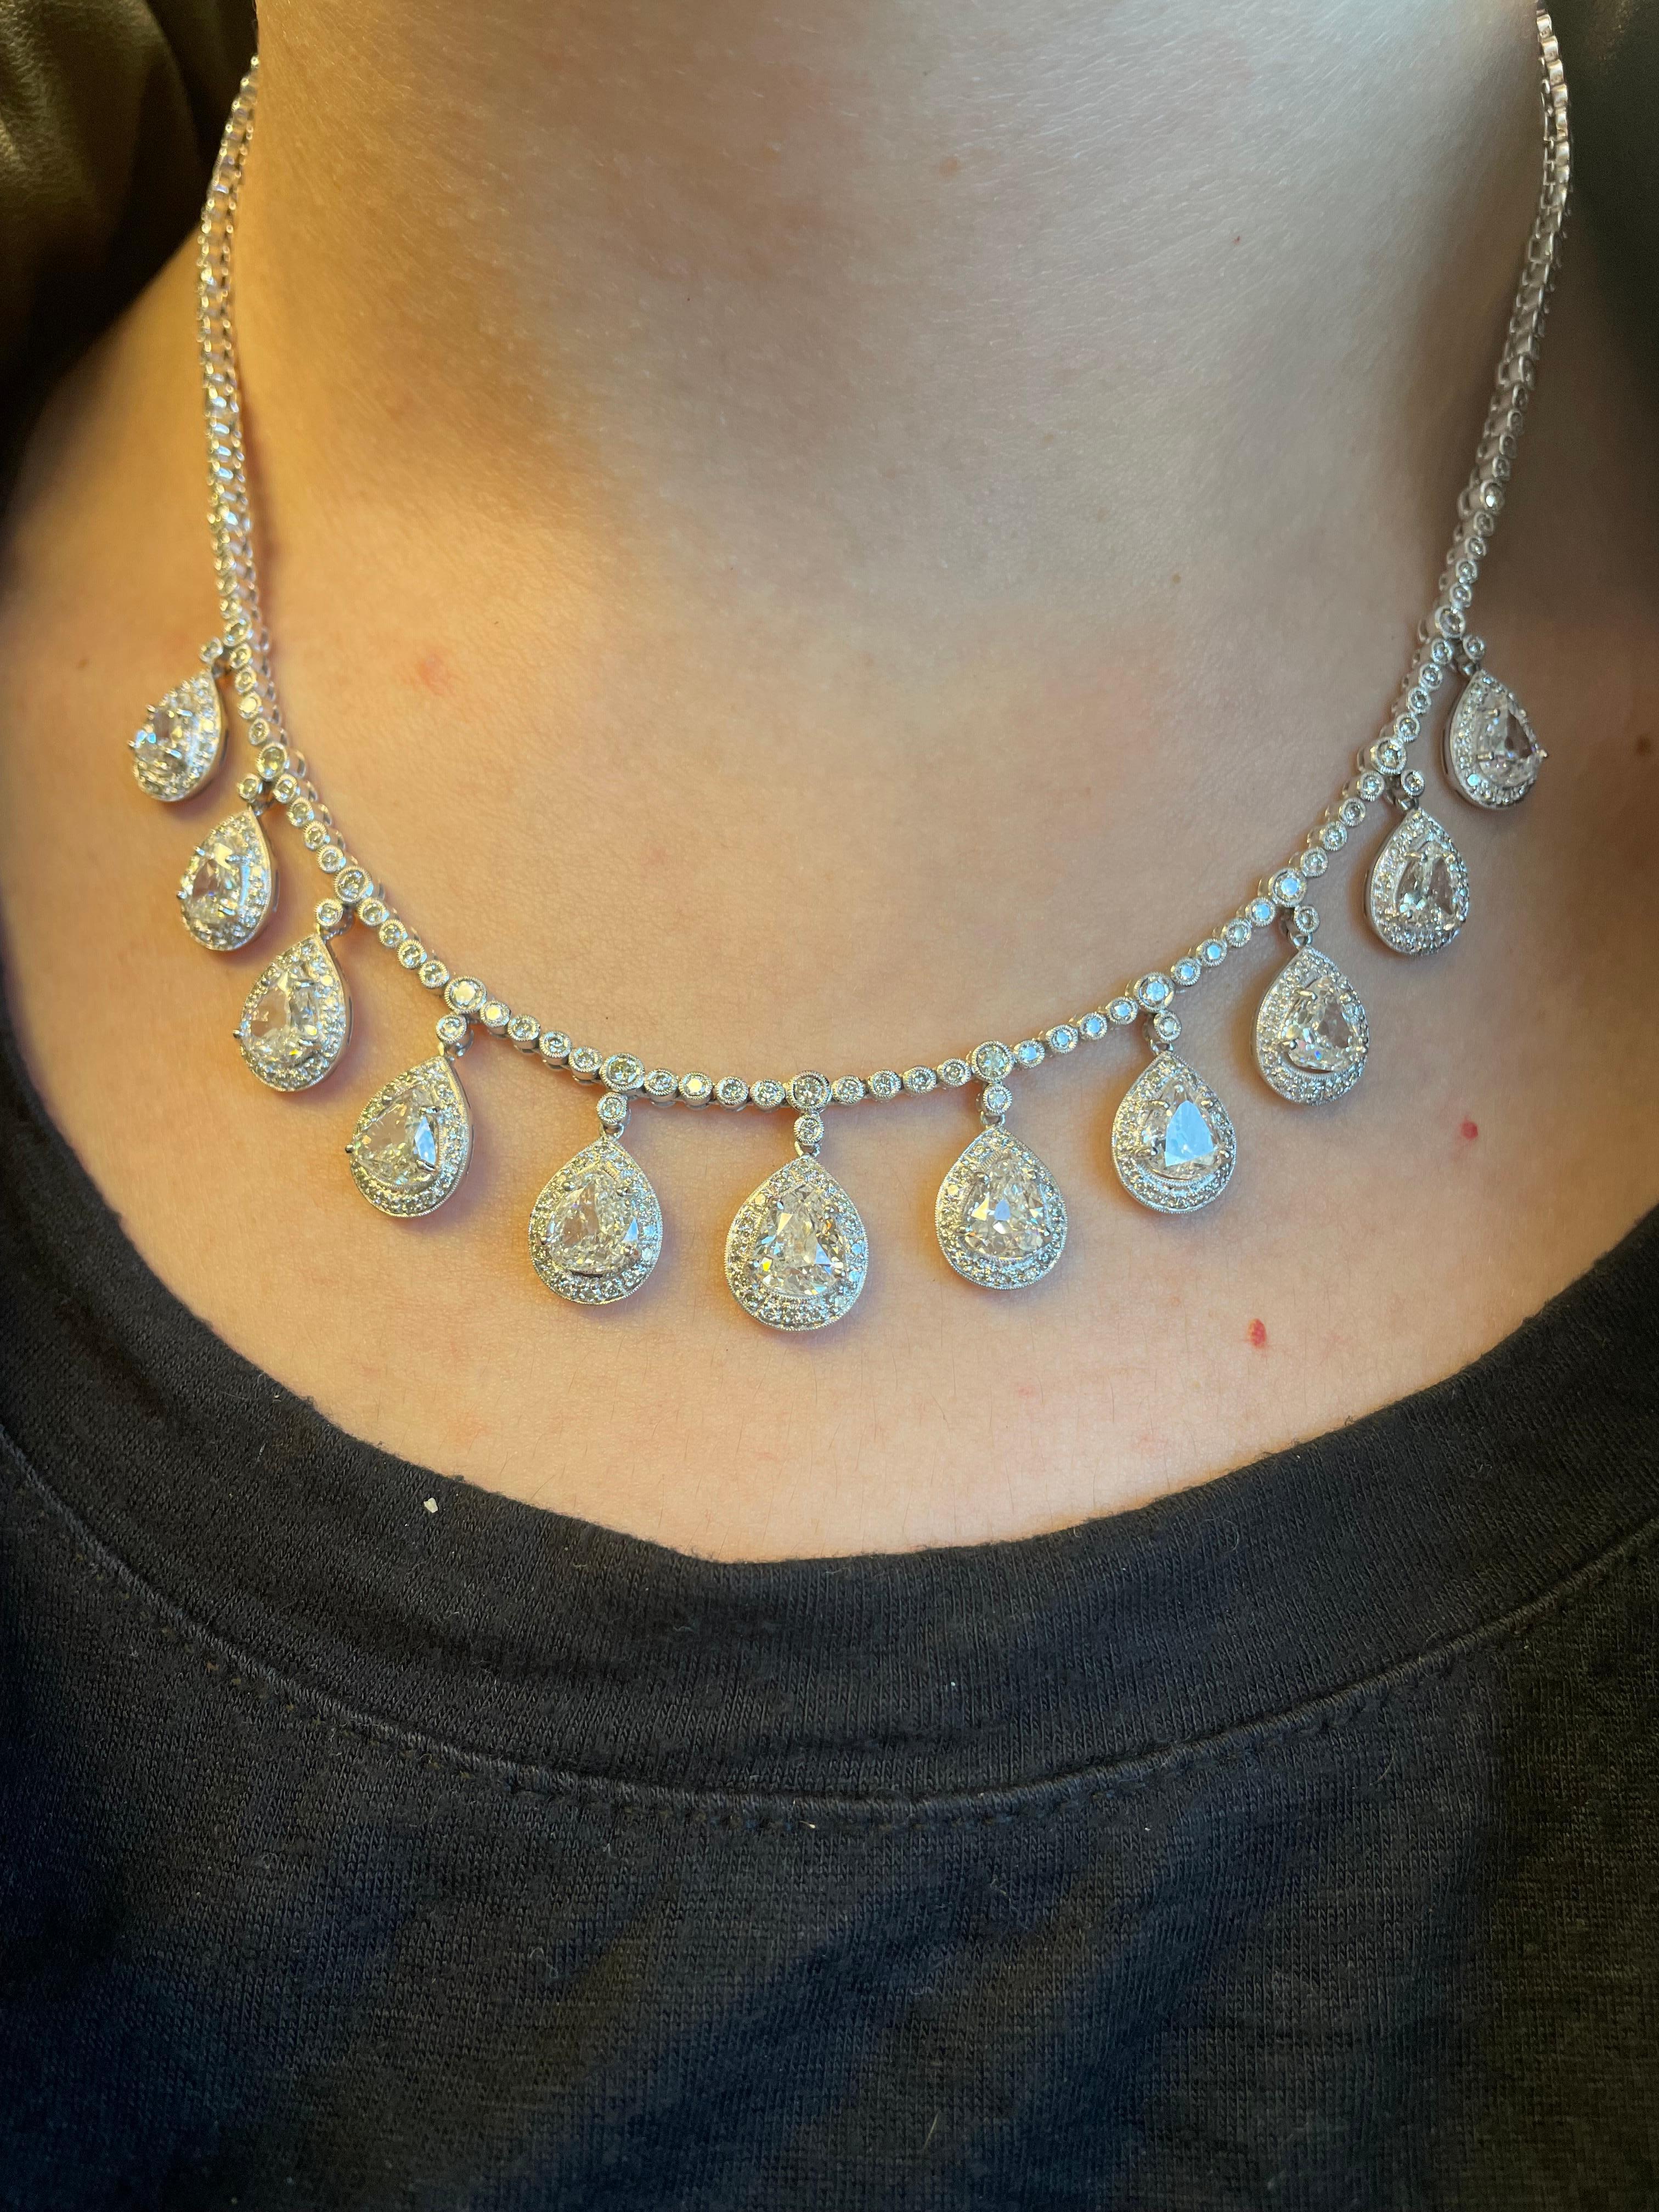 Exquisite dangling old pear cut diamond necklace with fine milgrain work, beautiful high jewelry.
347 diamonds total, 14.11 carats total. 11 old pear cut diamonds 9.36ct, approximately I/J color and SI clarity. 336 round brilliant diamonds 4.75ct,